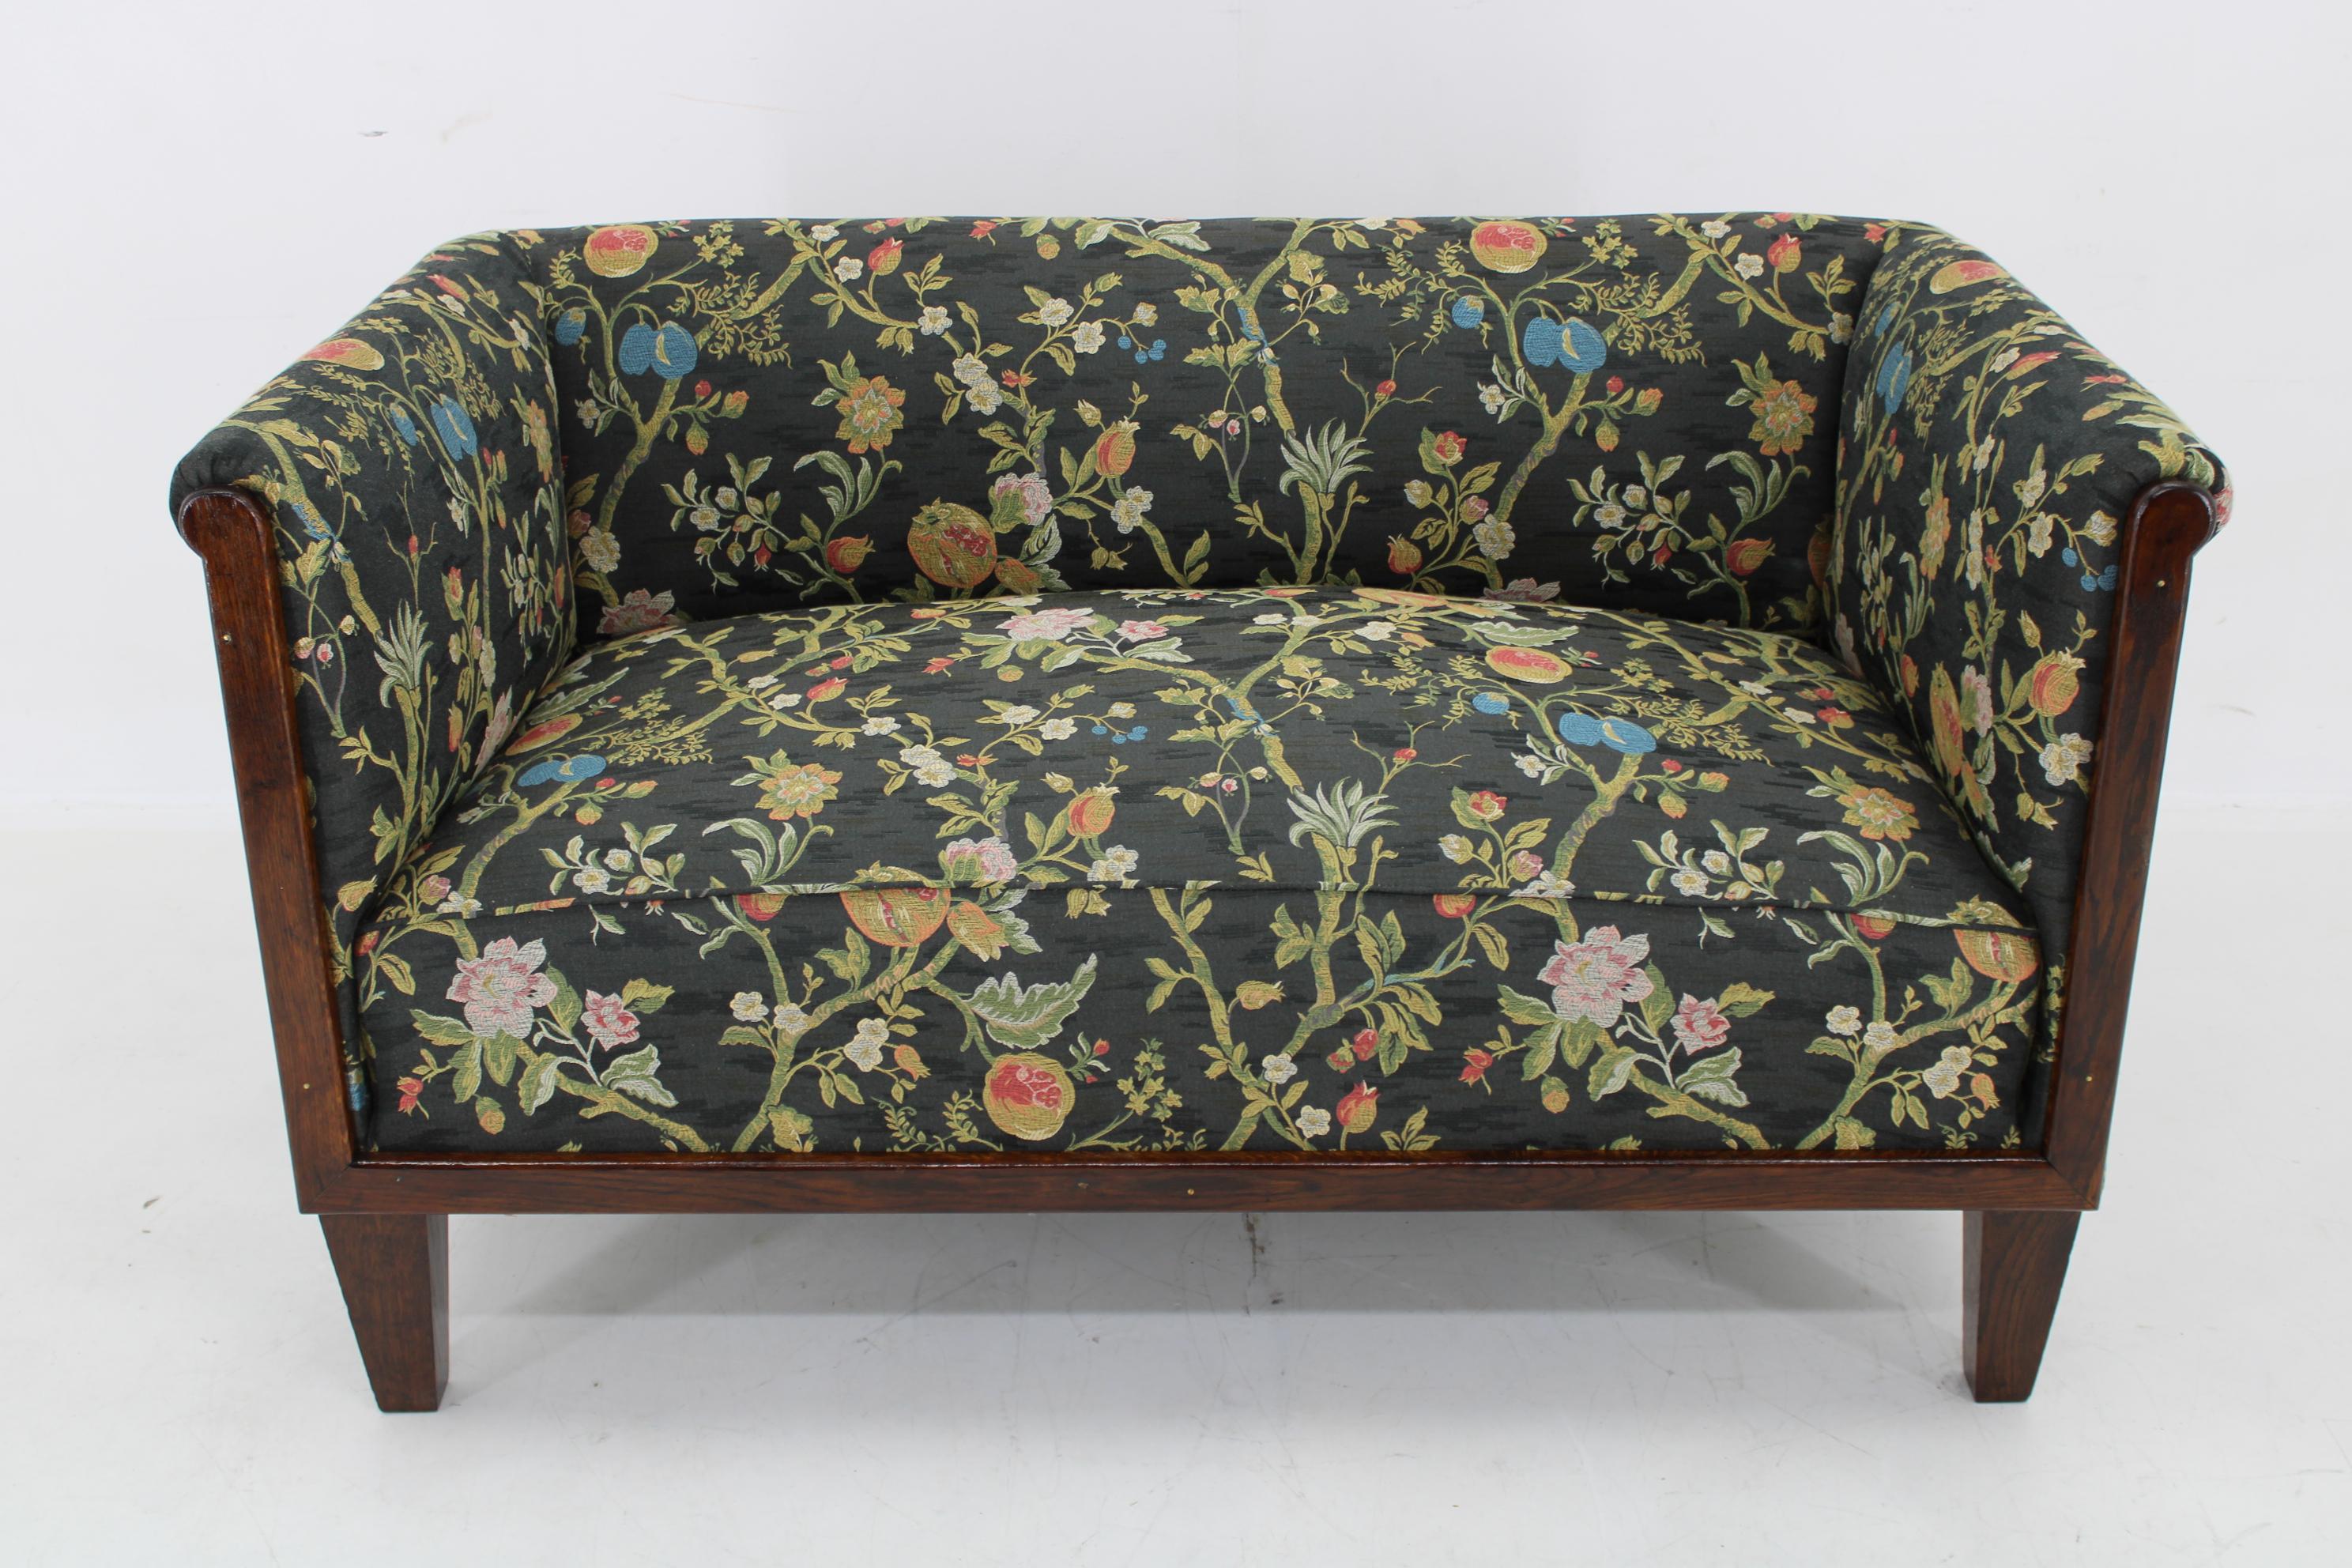 - newly upholstered in floral pattern fabric
- refinished oak wooden parts